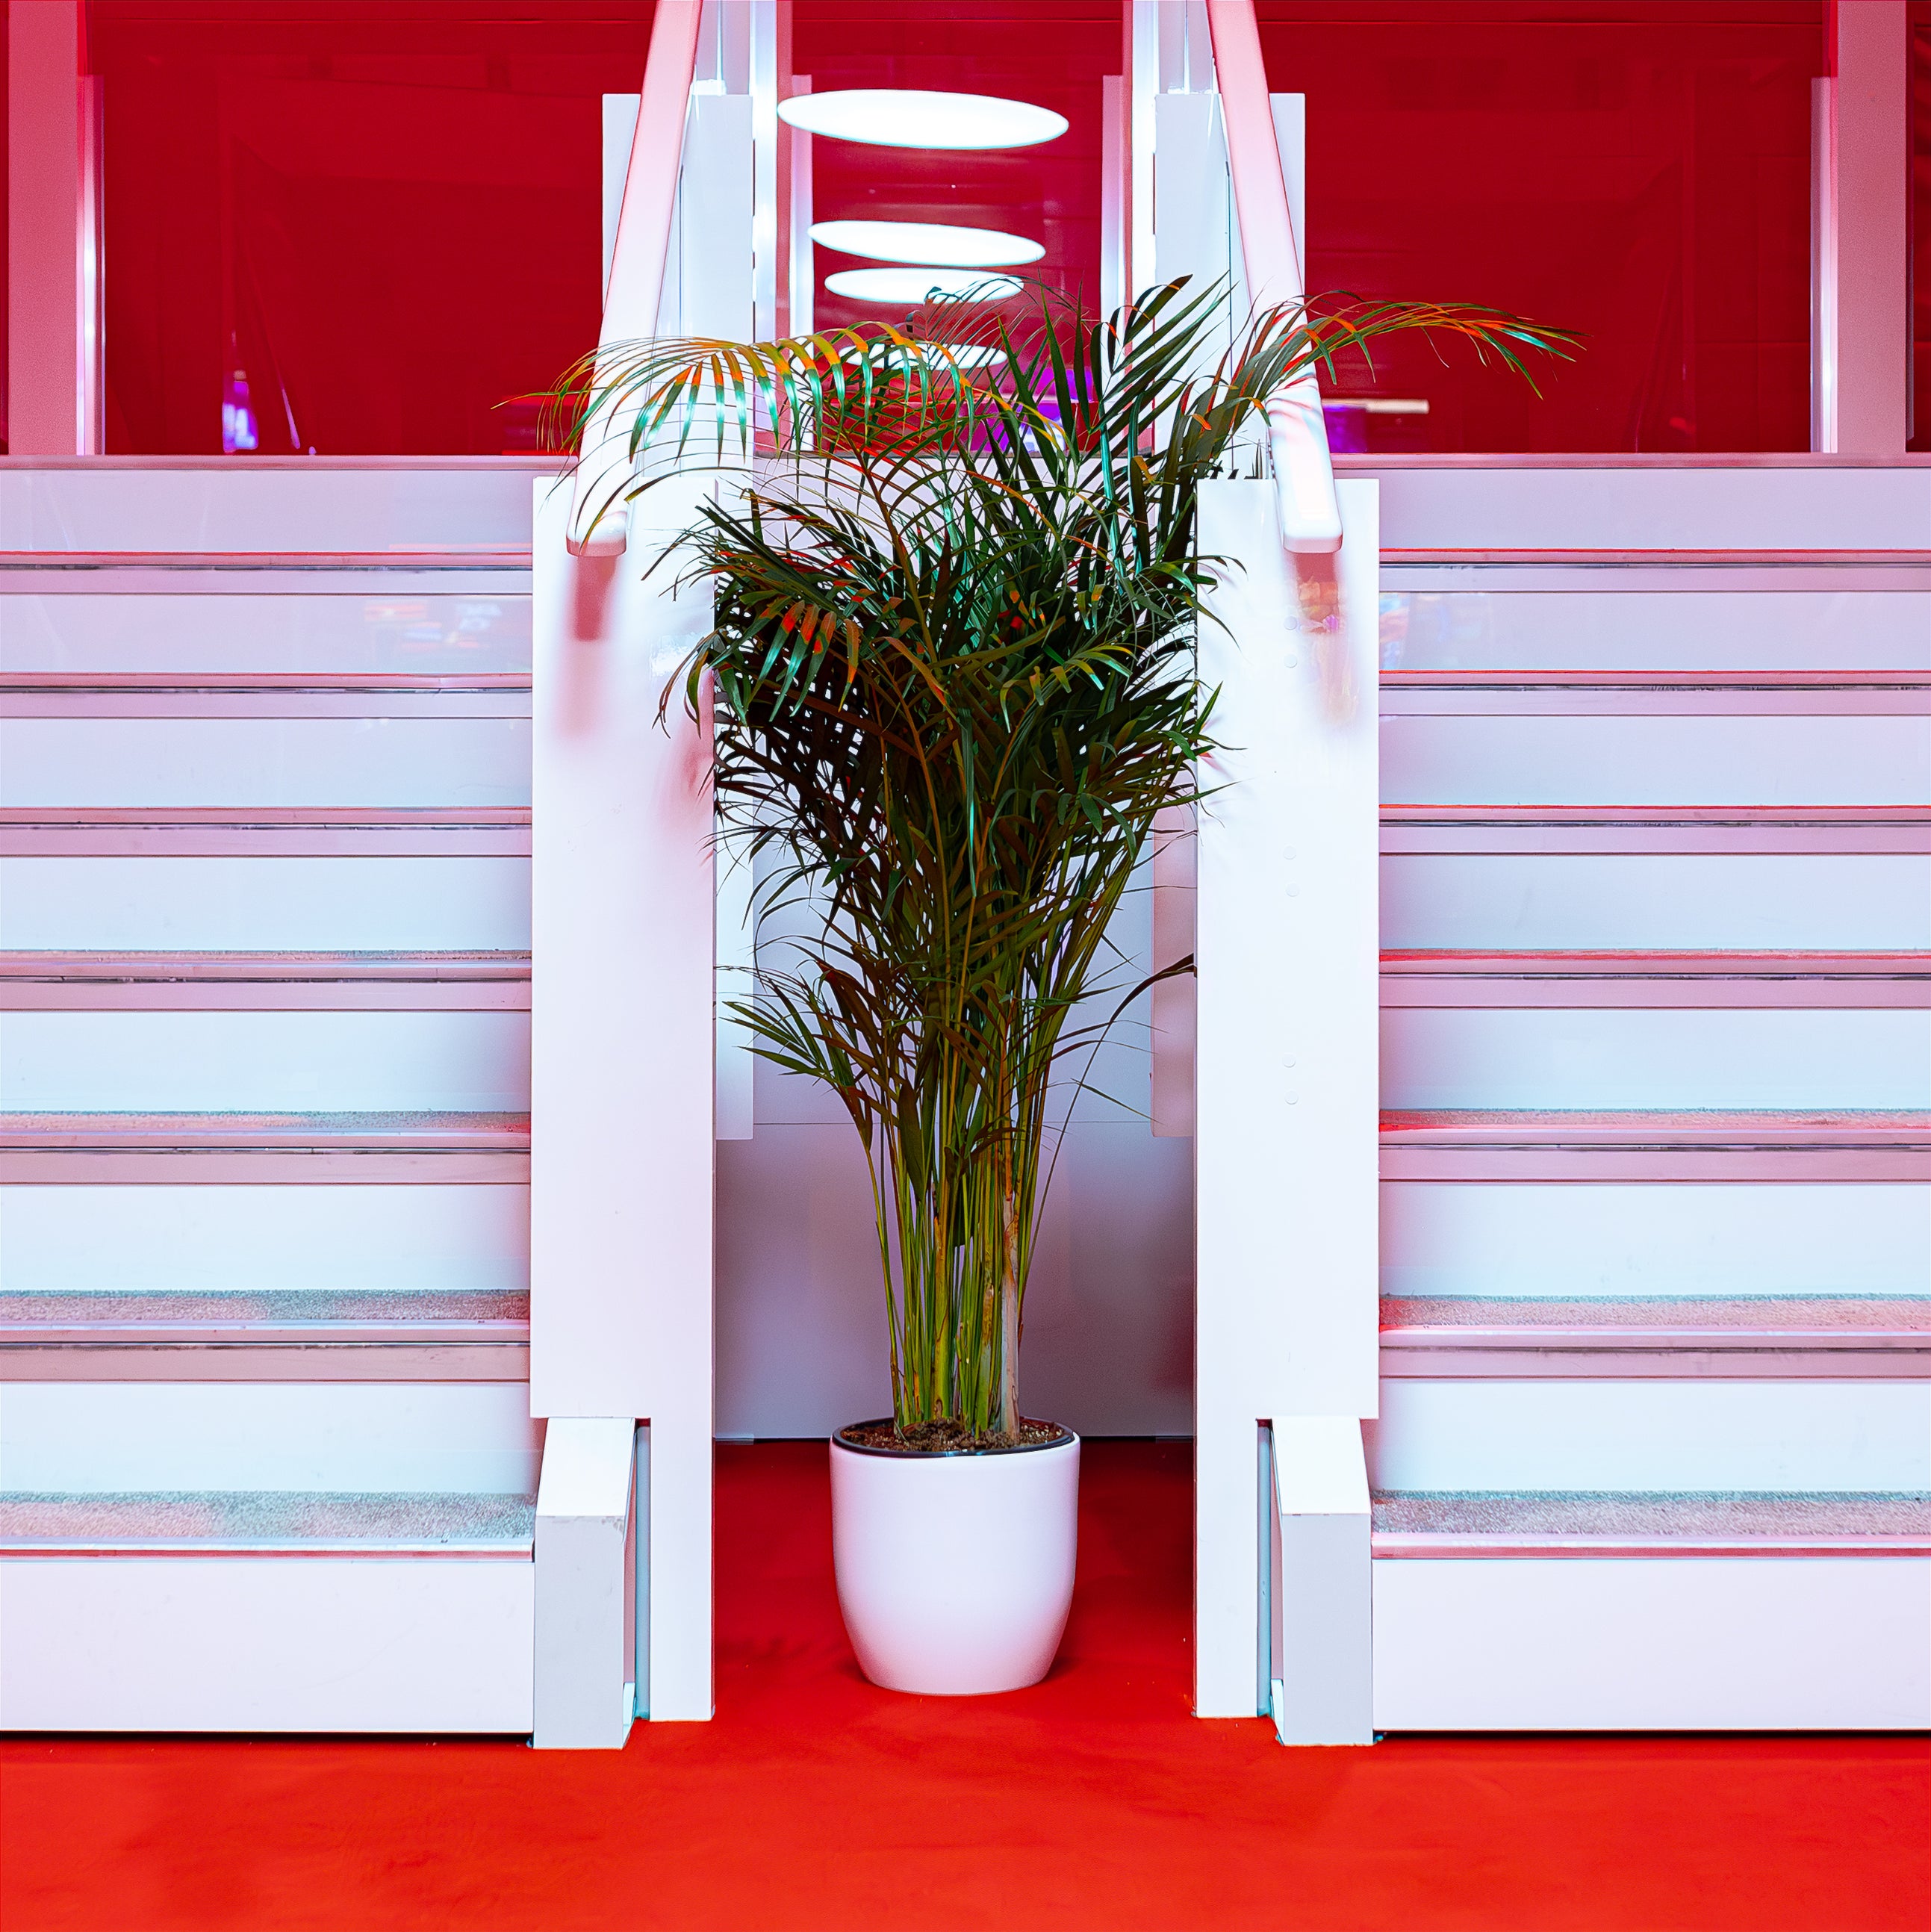 This tall, green, slender palm plant stands at the base of a white stairway, juxtaposing the vivid red theme of the ICE London Exhibition, inviting attendees to a space of innovation above.